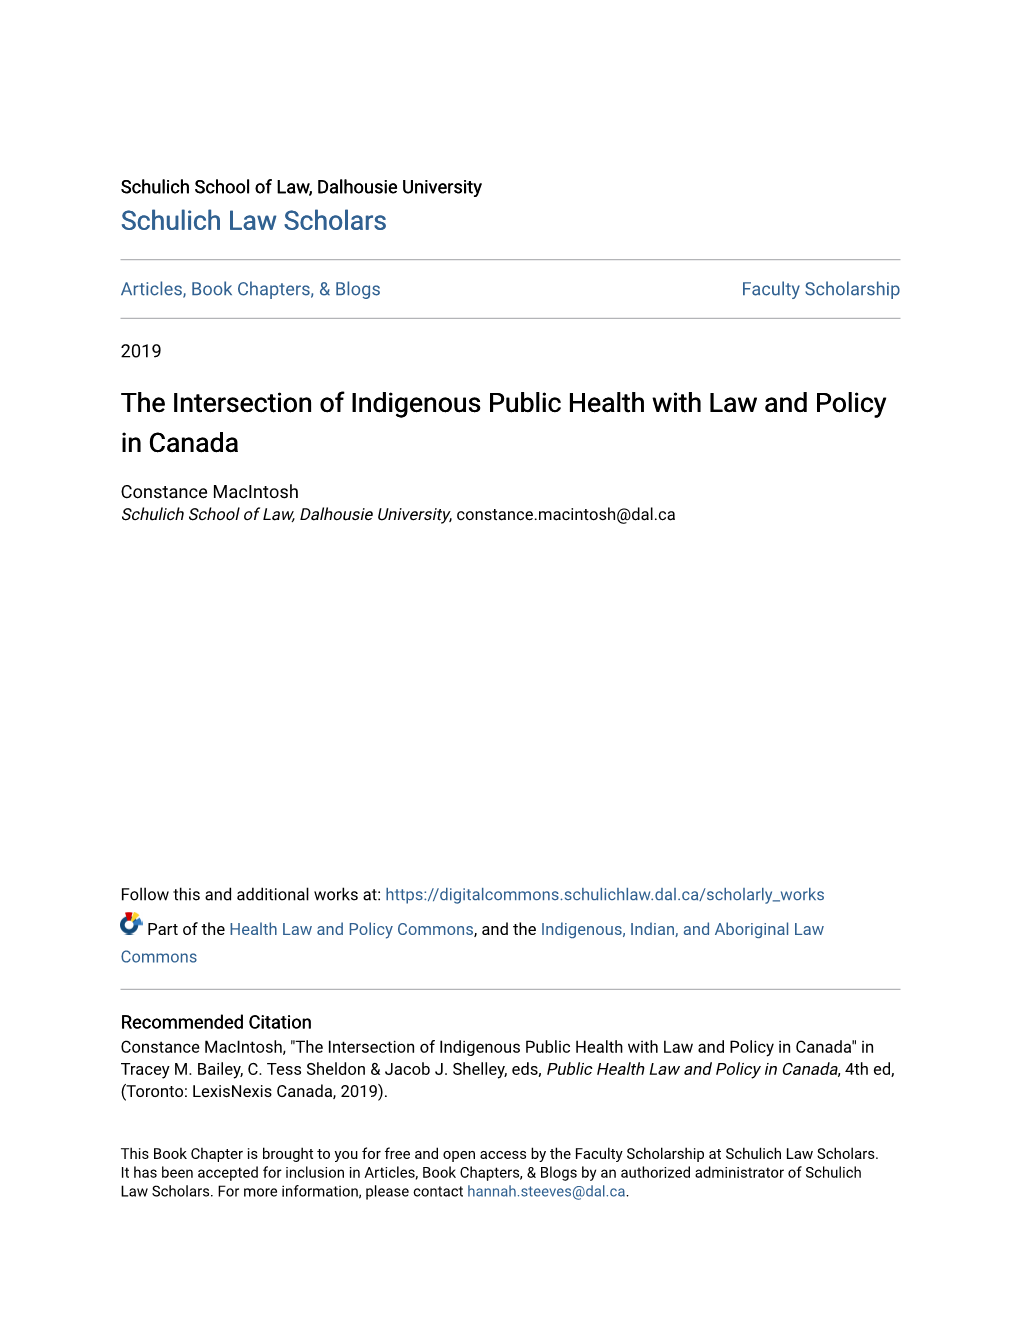 The Intersection of Indigenous Public Health with Law and Policy in Canada